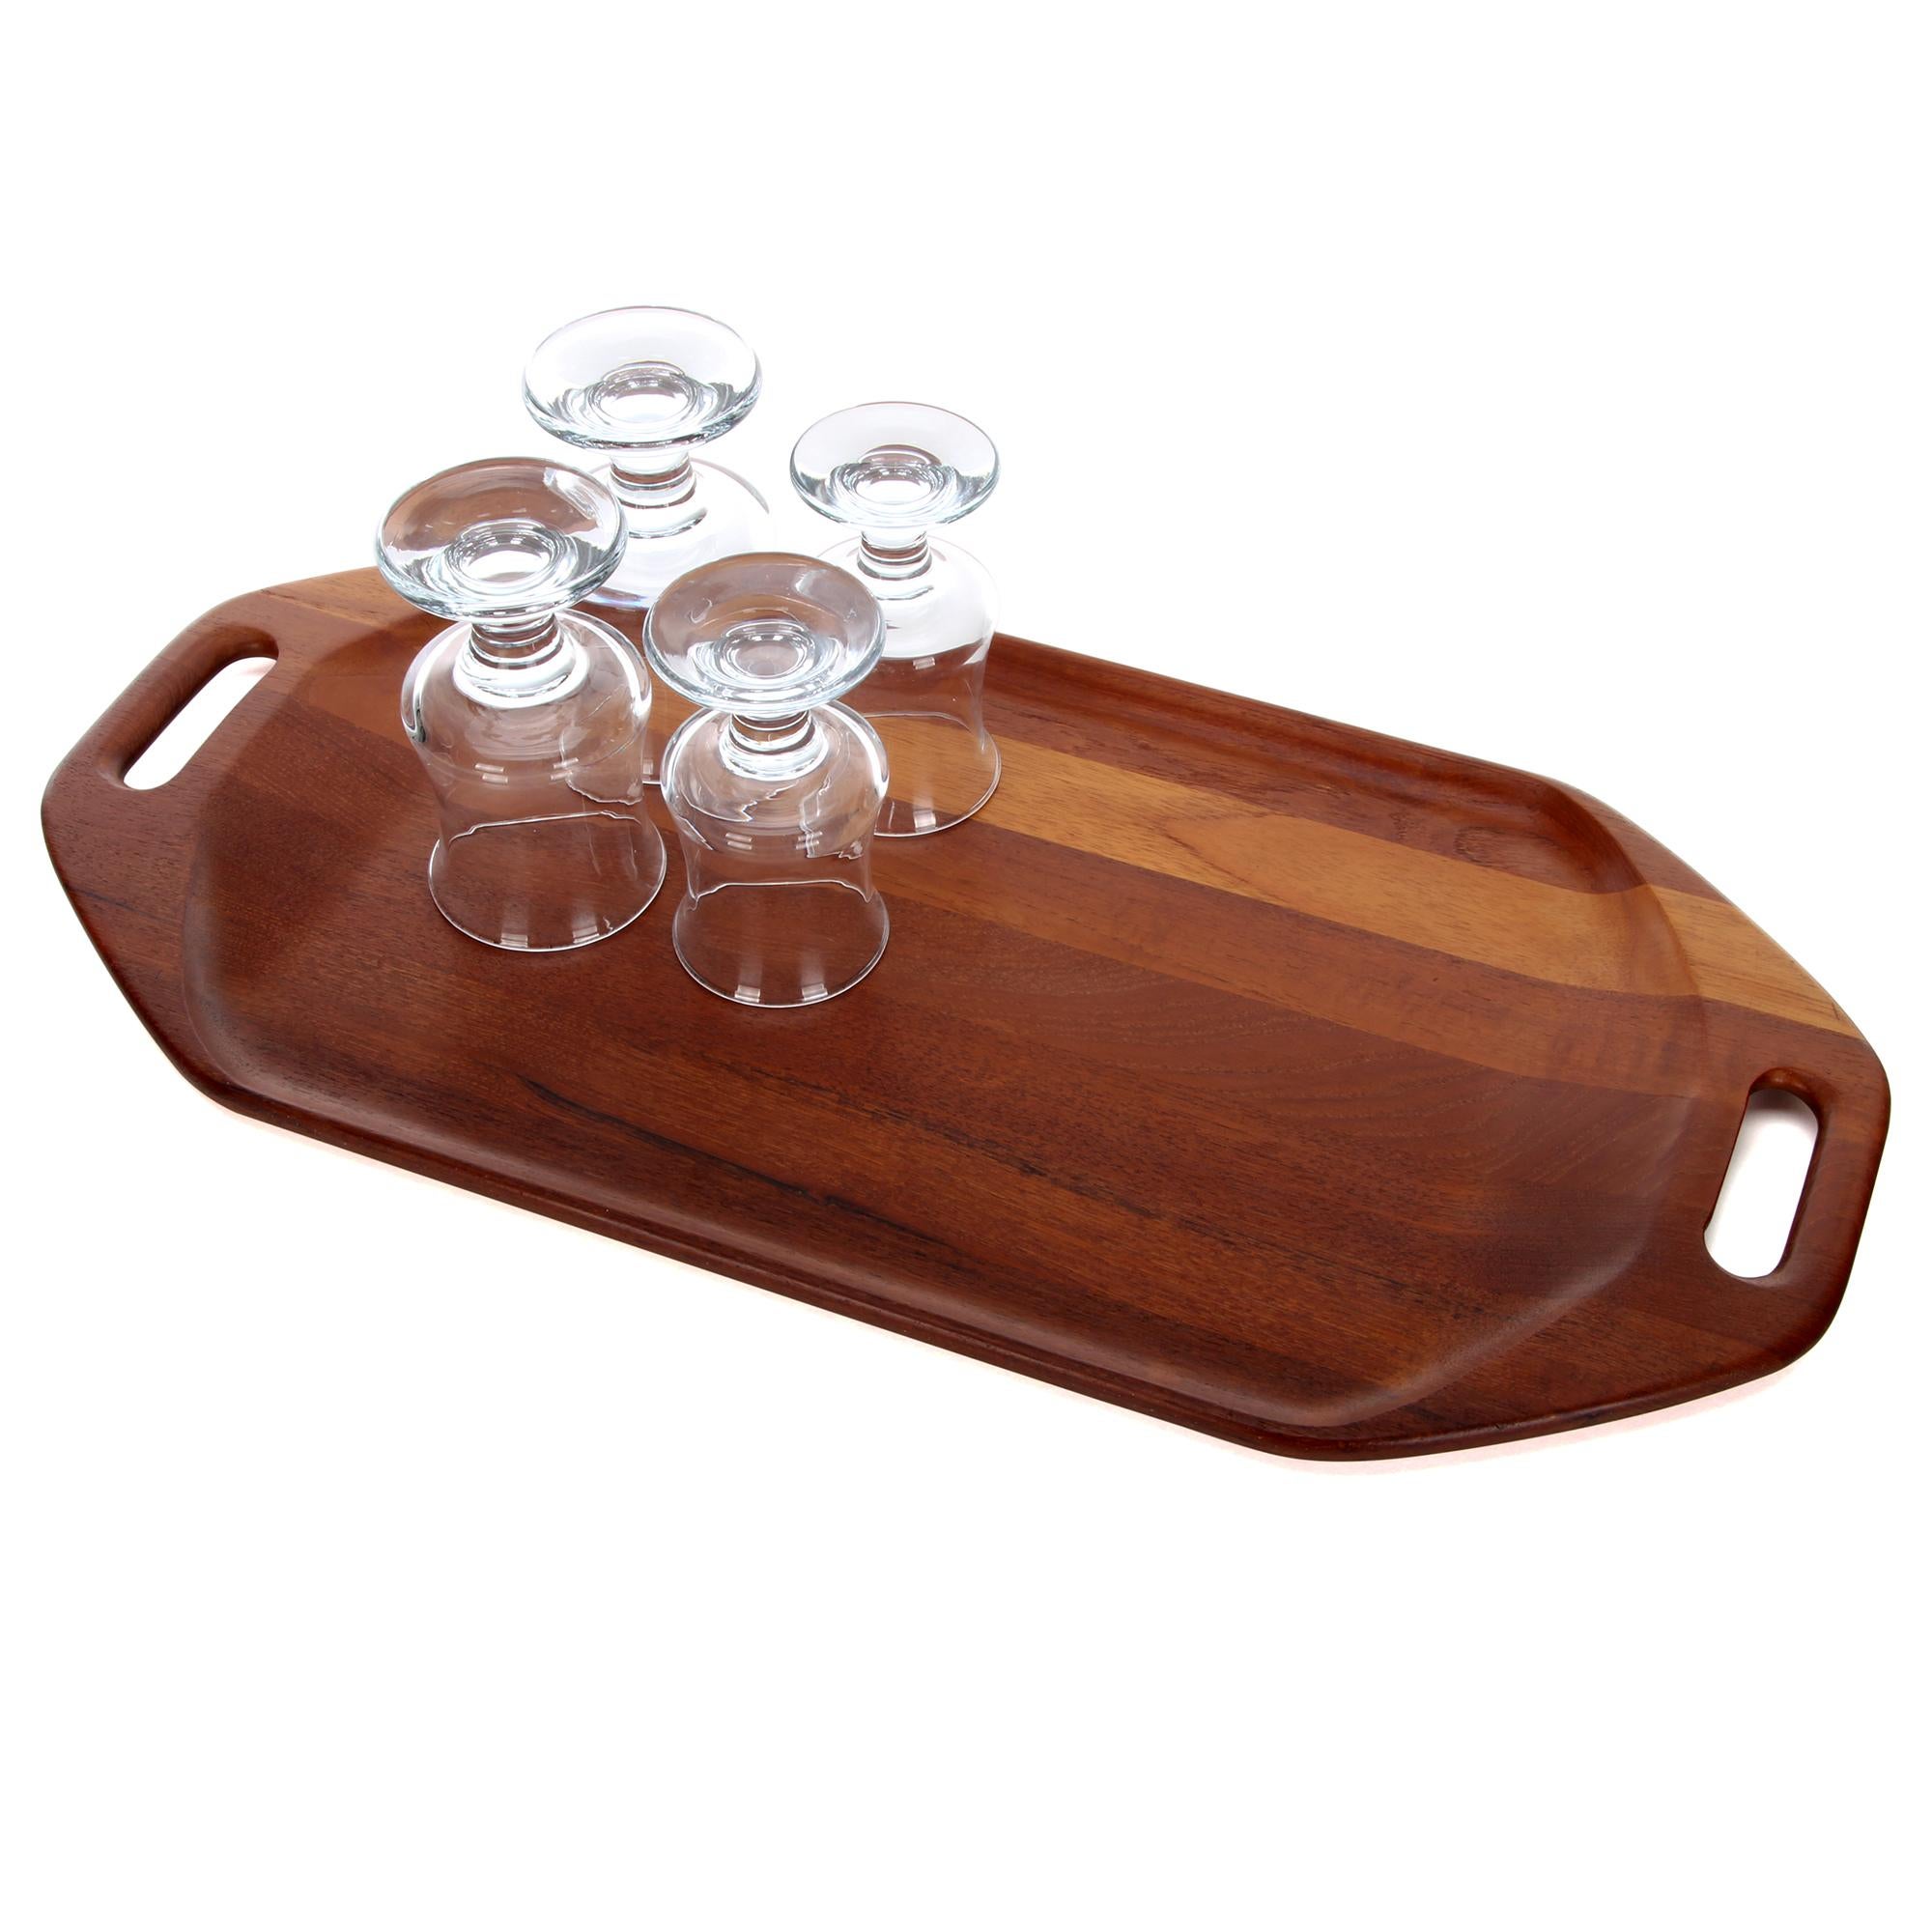 Teak tray by Flemming Digsmed for Digsmed in 1964 - Large Danish modern teak serving tray in excellent vintage condition.

A beautiful oval shaped teak serving tray with soft rounded rims, a slightly shallow middle part and smart incorporated